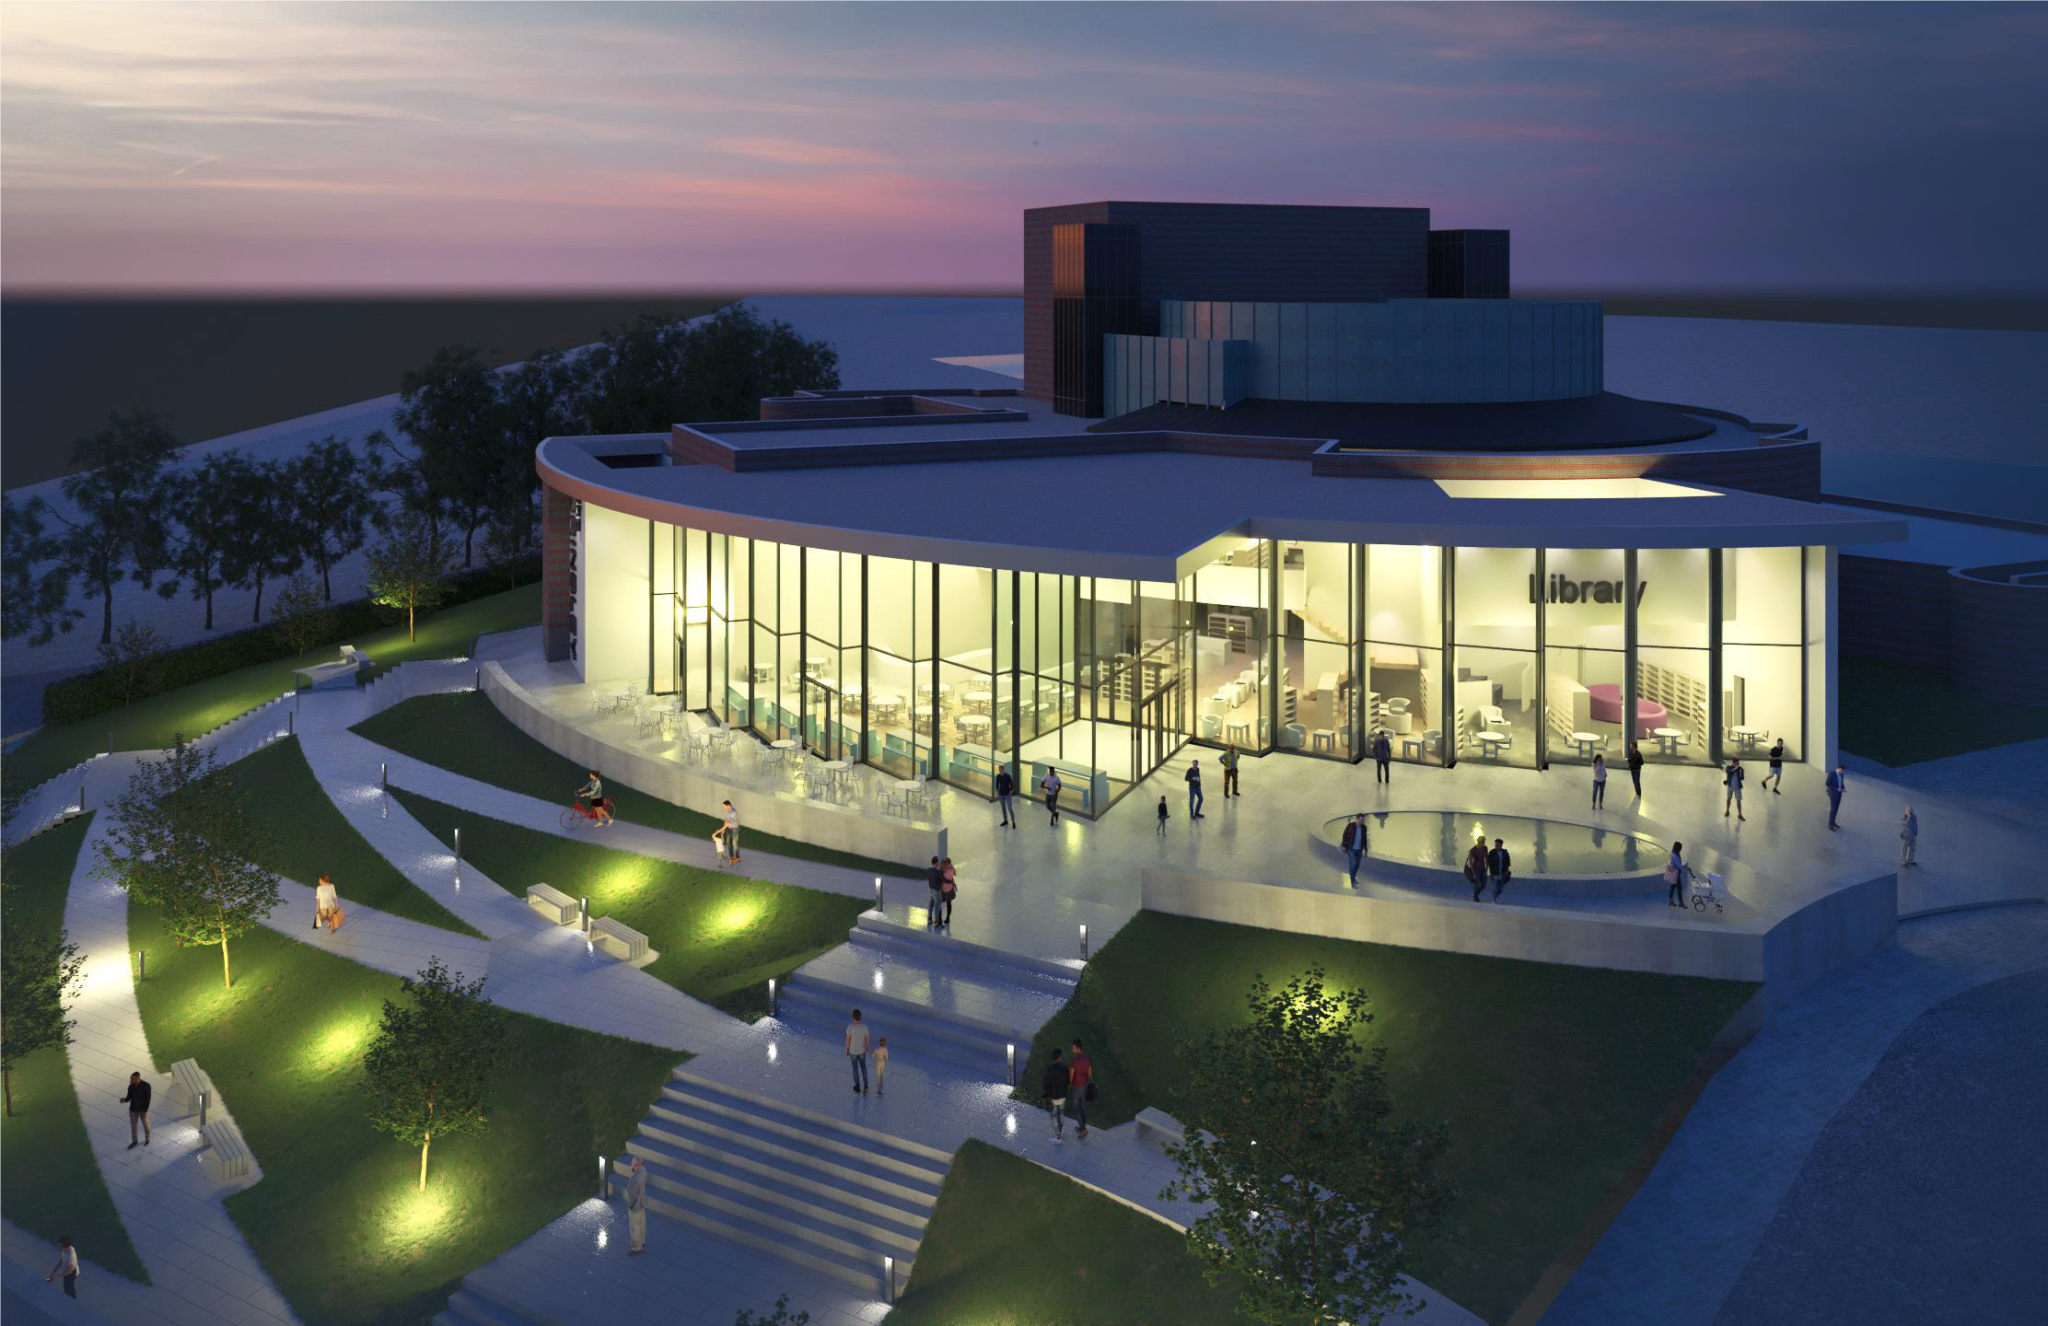 artists impression of brindley theatre extension